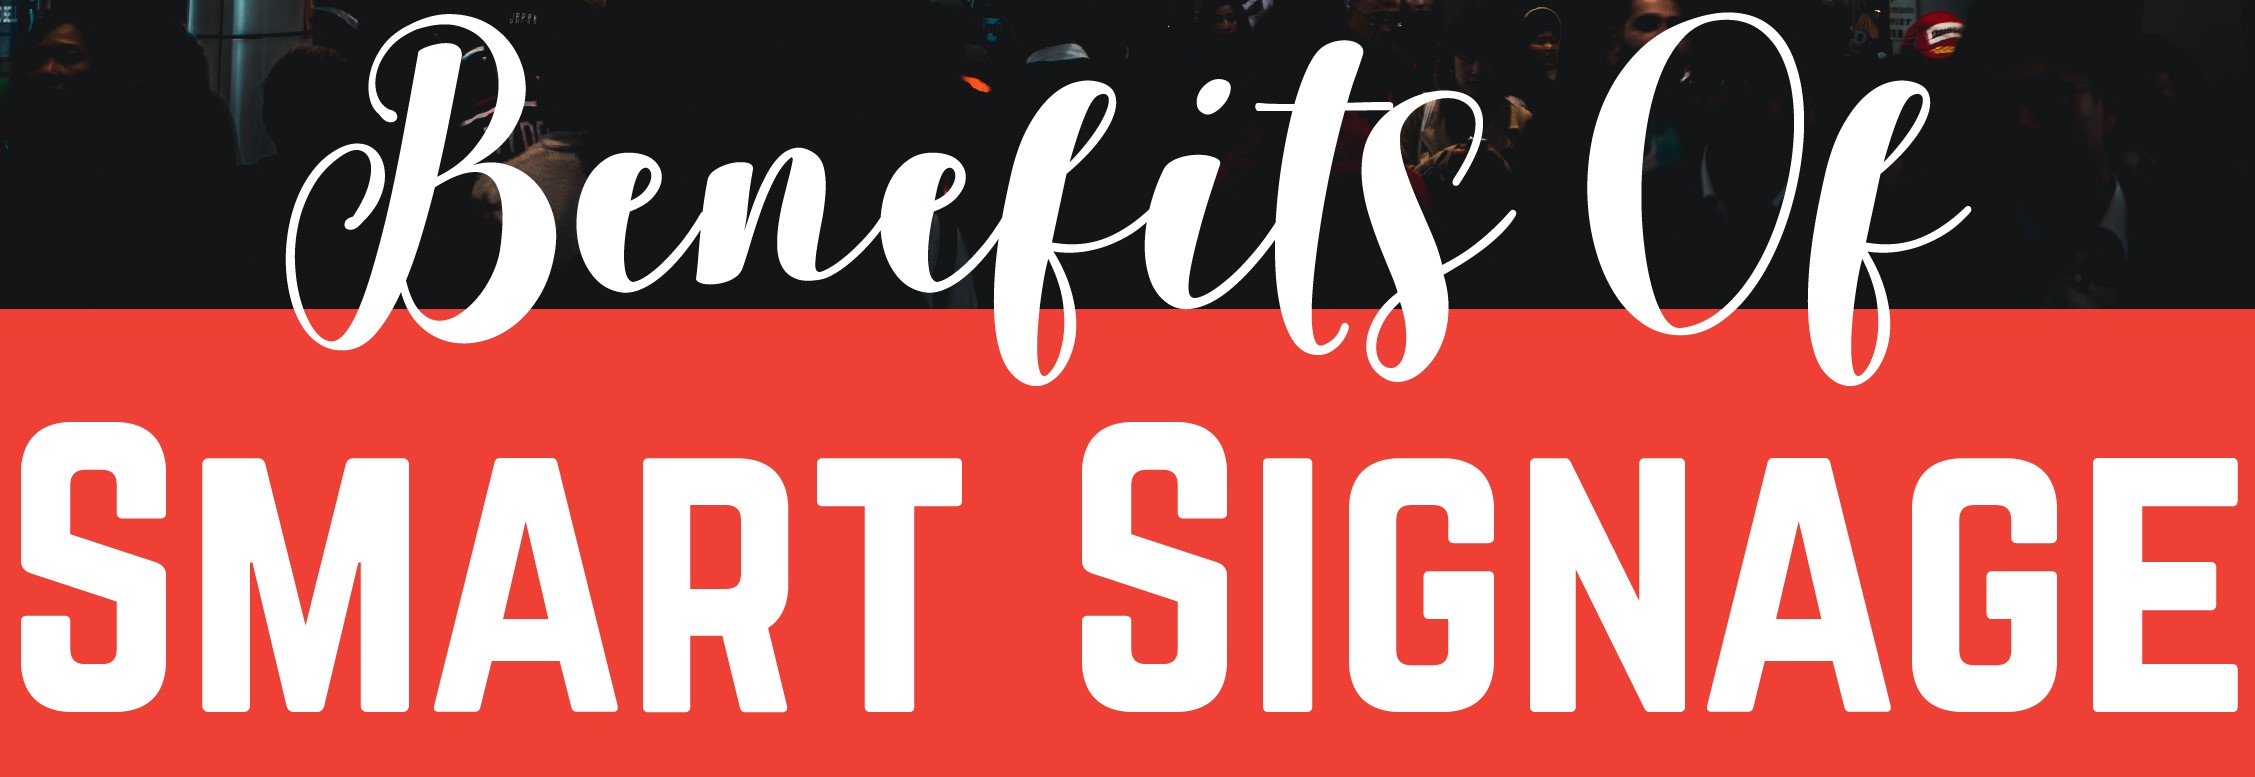 Benefits of Smart Signage - Infograph